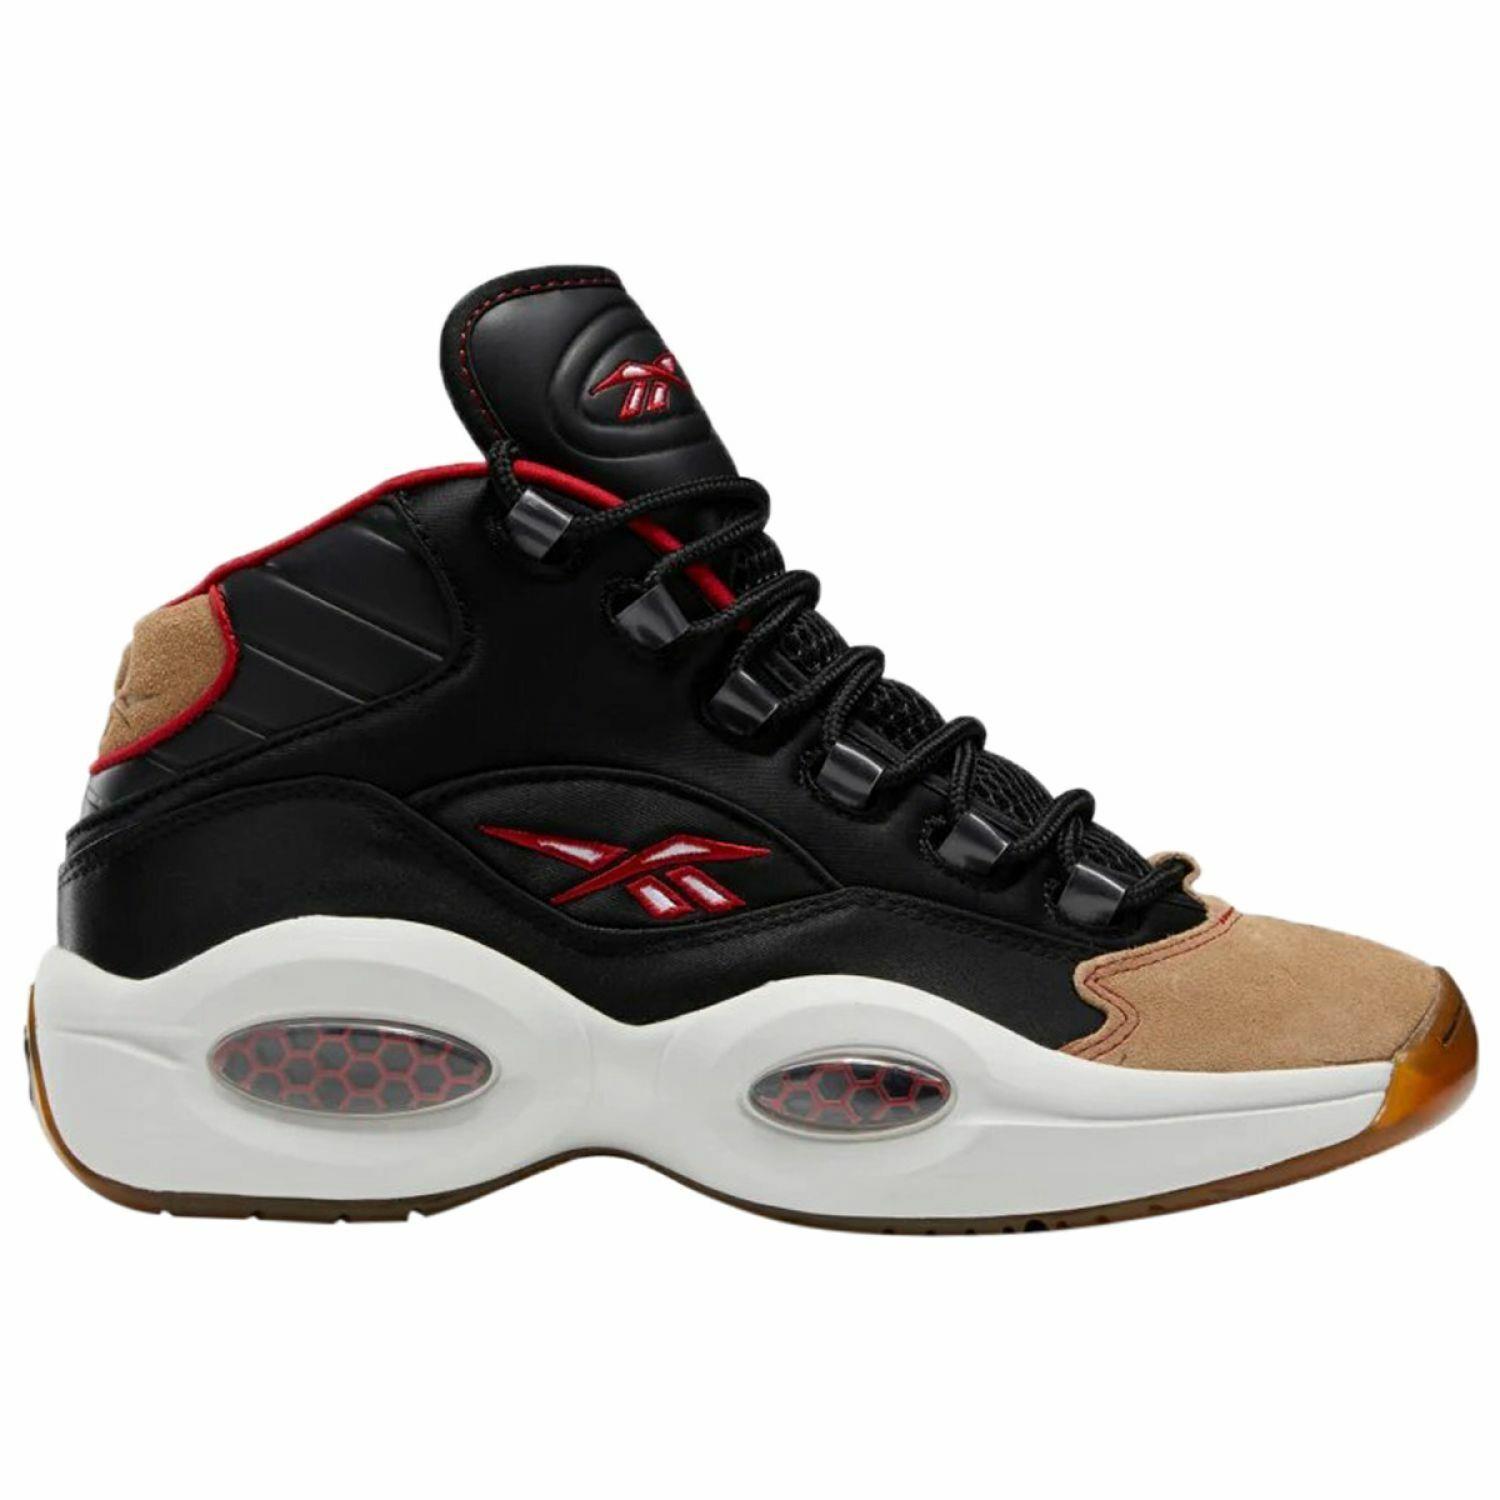 Reebok Question Mid 76ers Away Mens H00847 Black Red Basketball Shoes Size 8